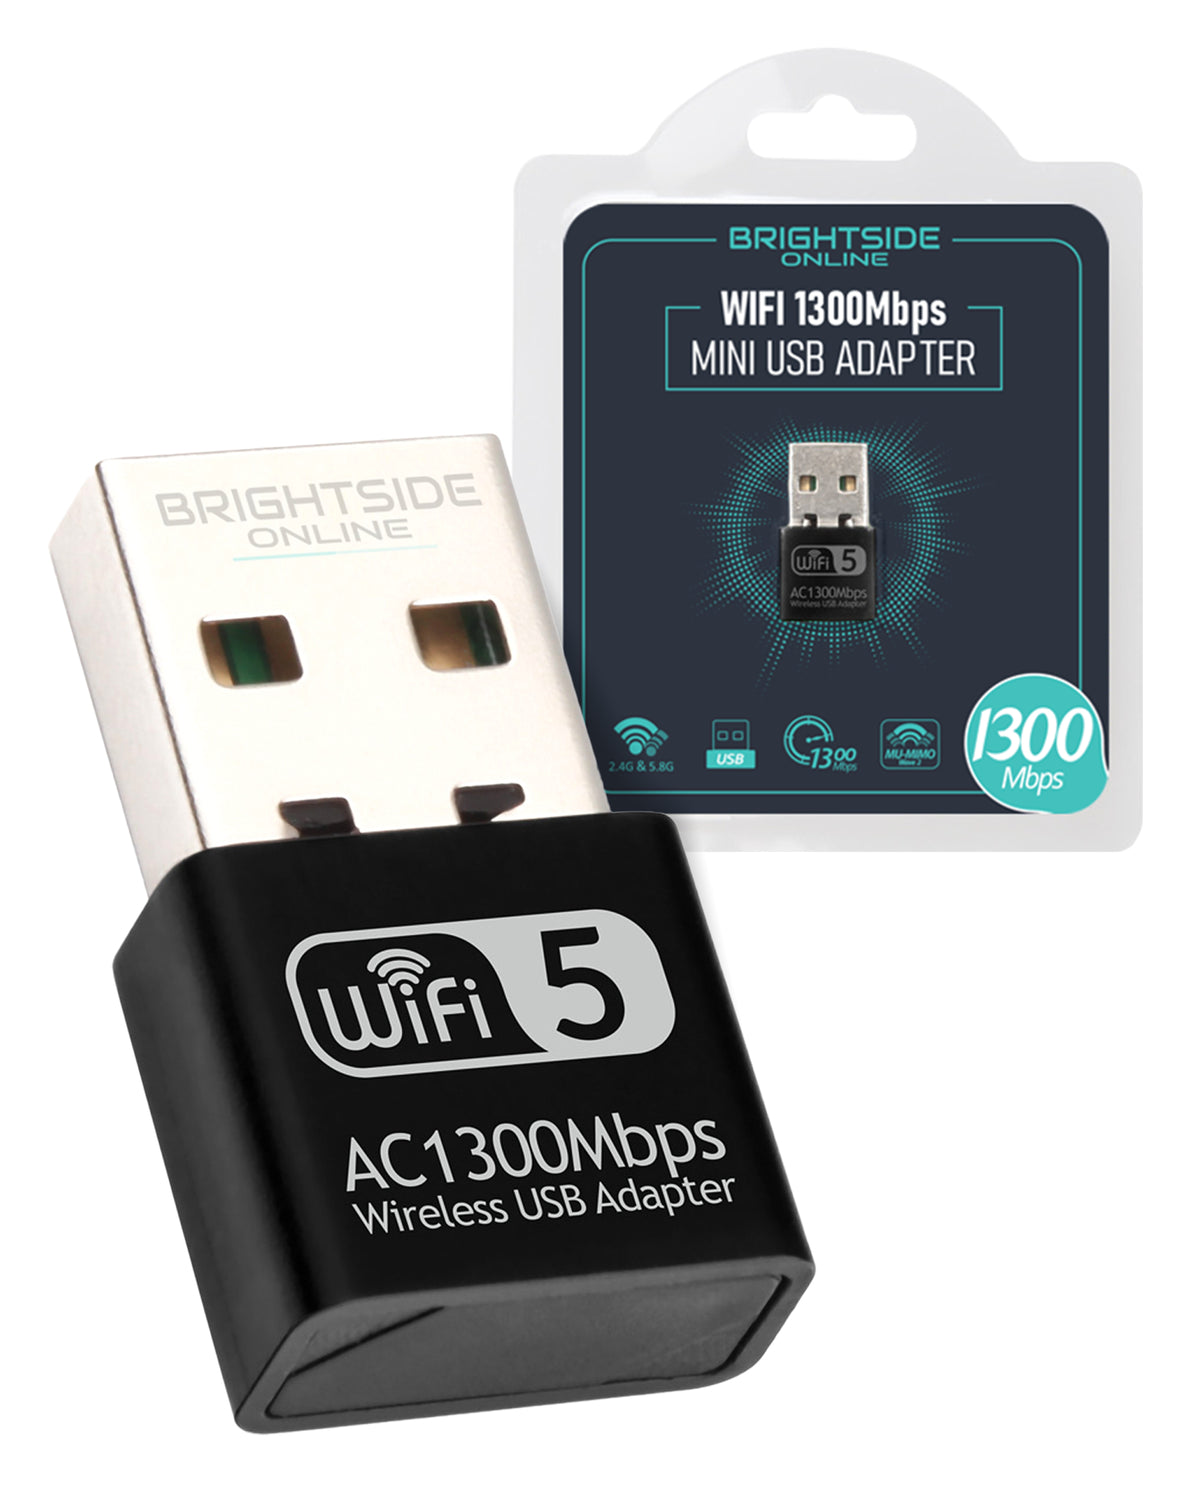 brightside wifi adapter usb 1300 mbps